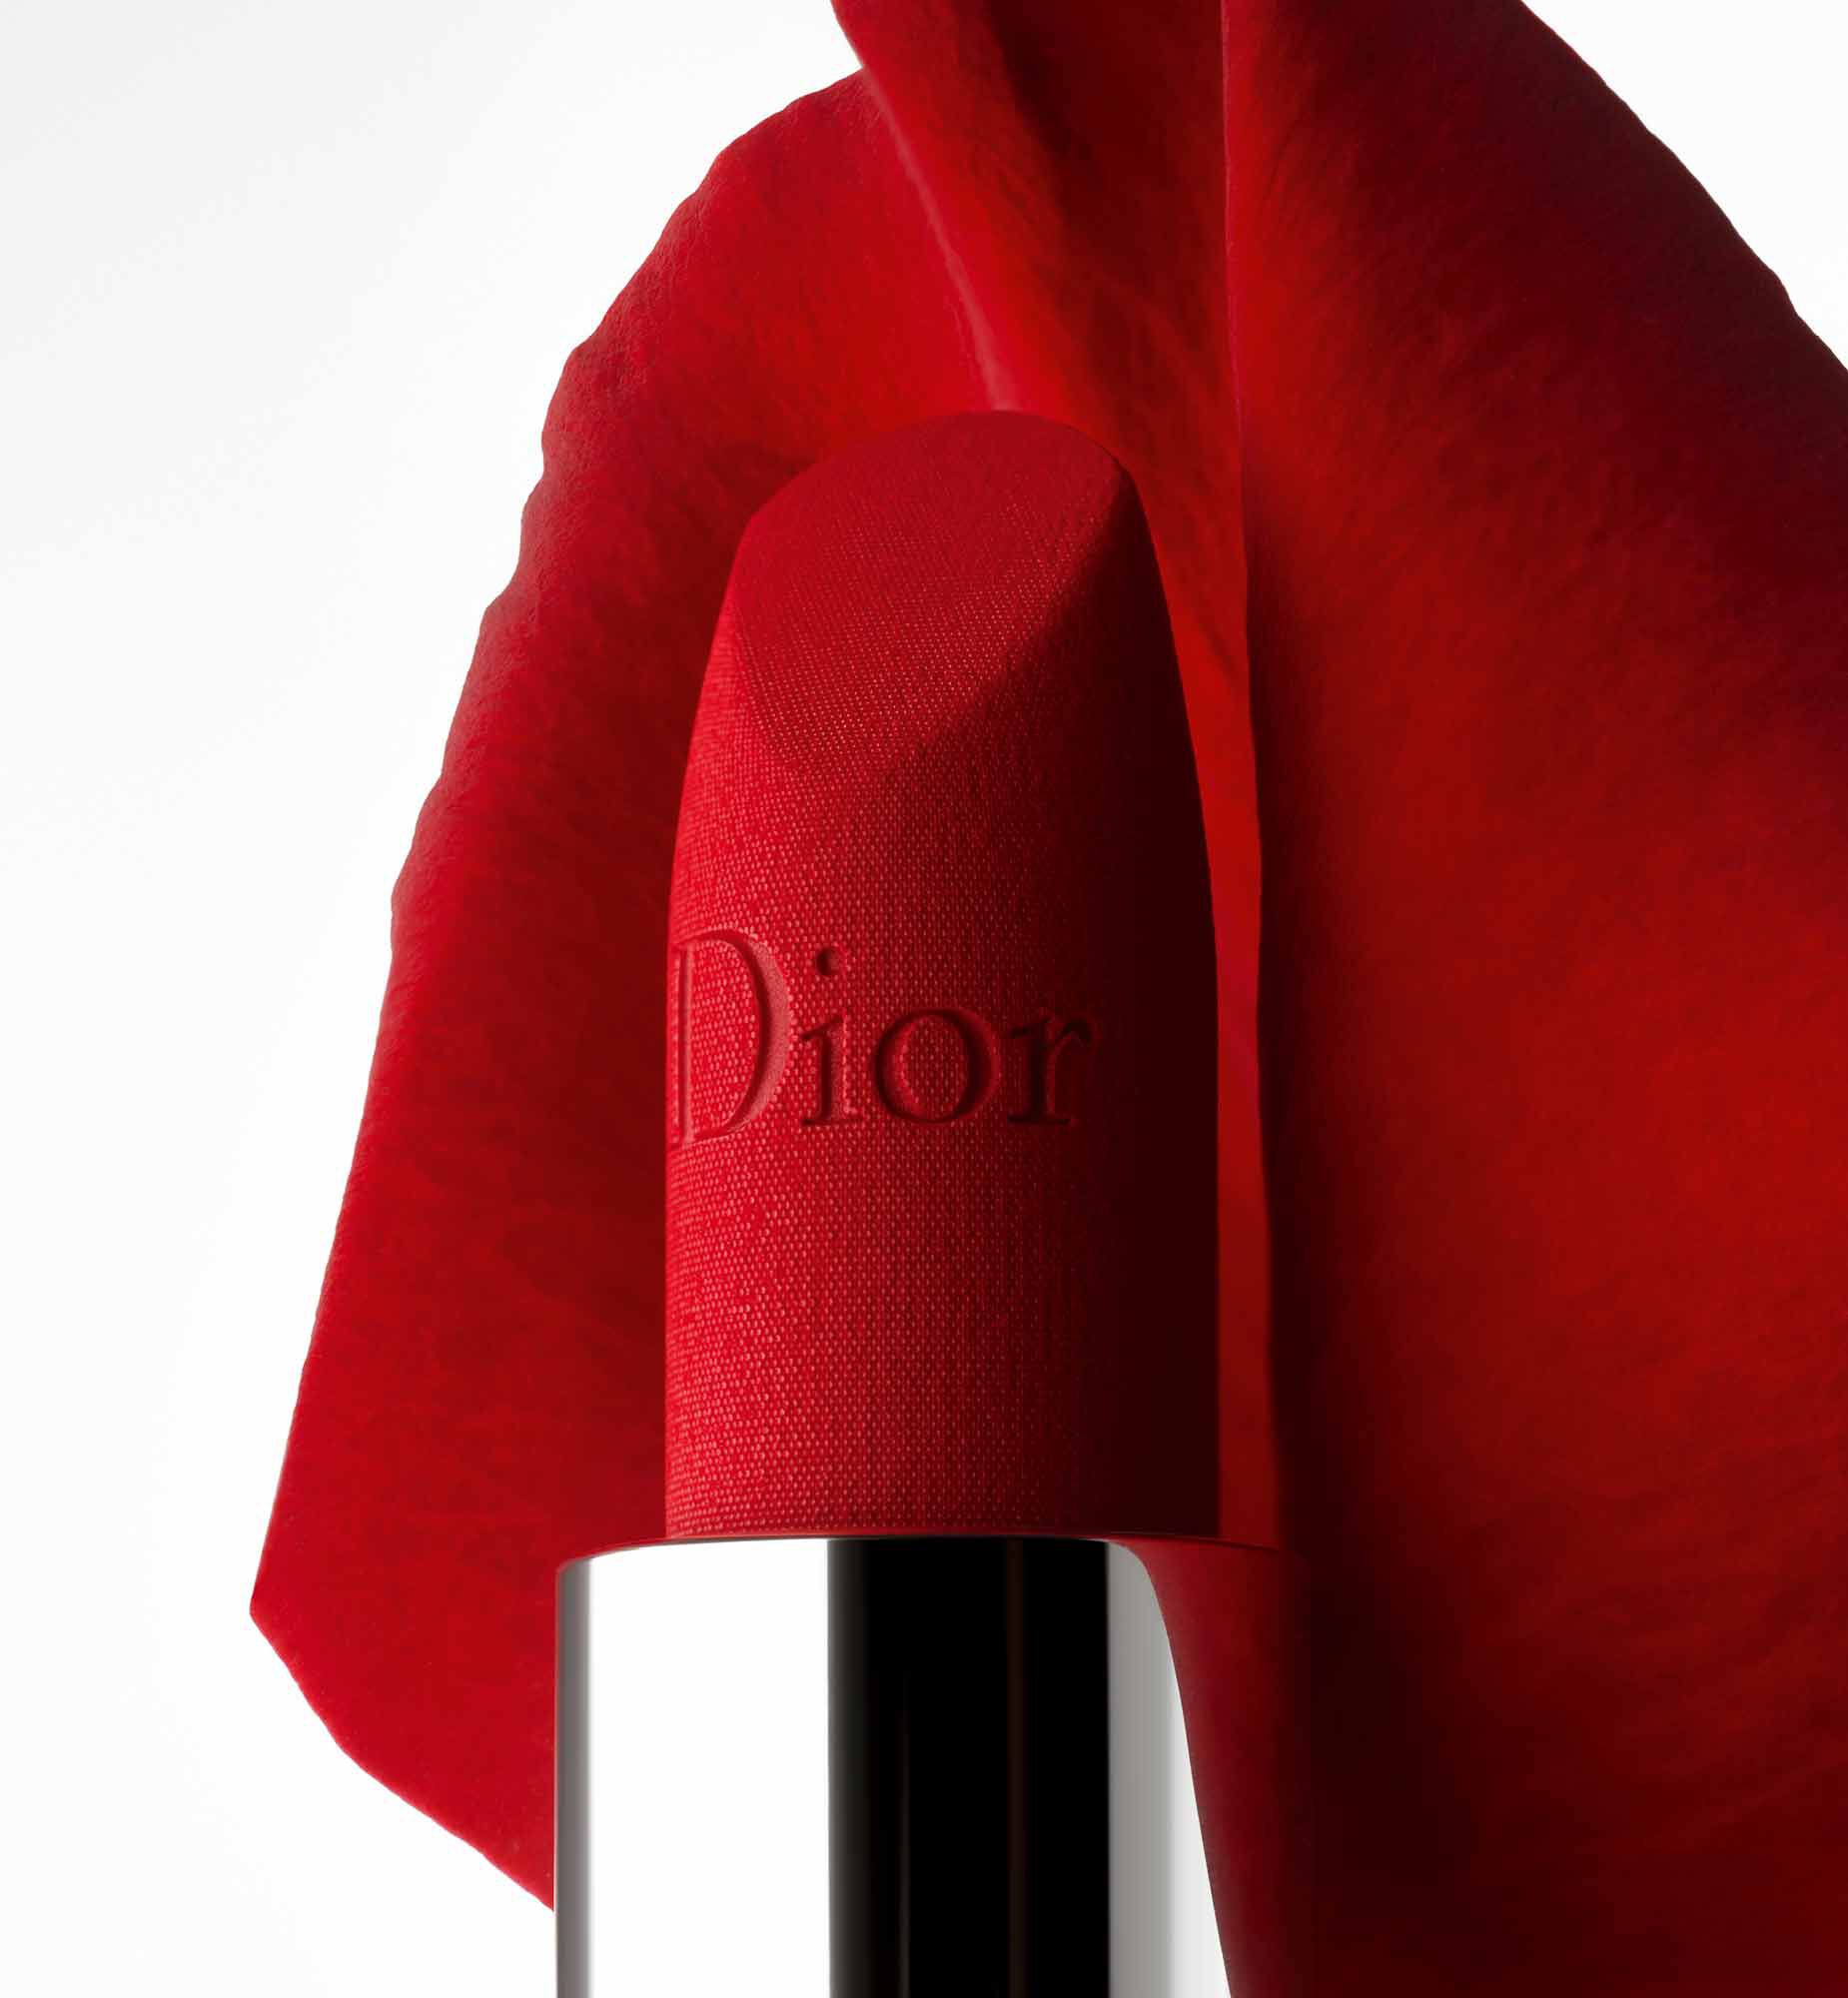 Rouge Dior Refillable Lipstick in 4 Finishes  DIOR US